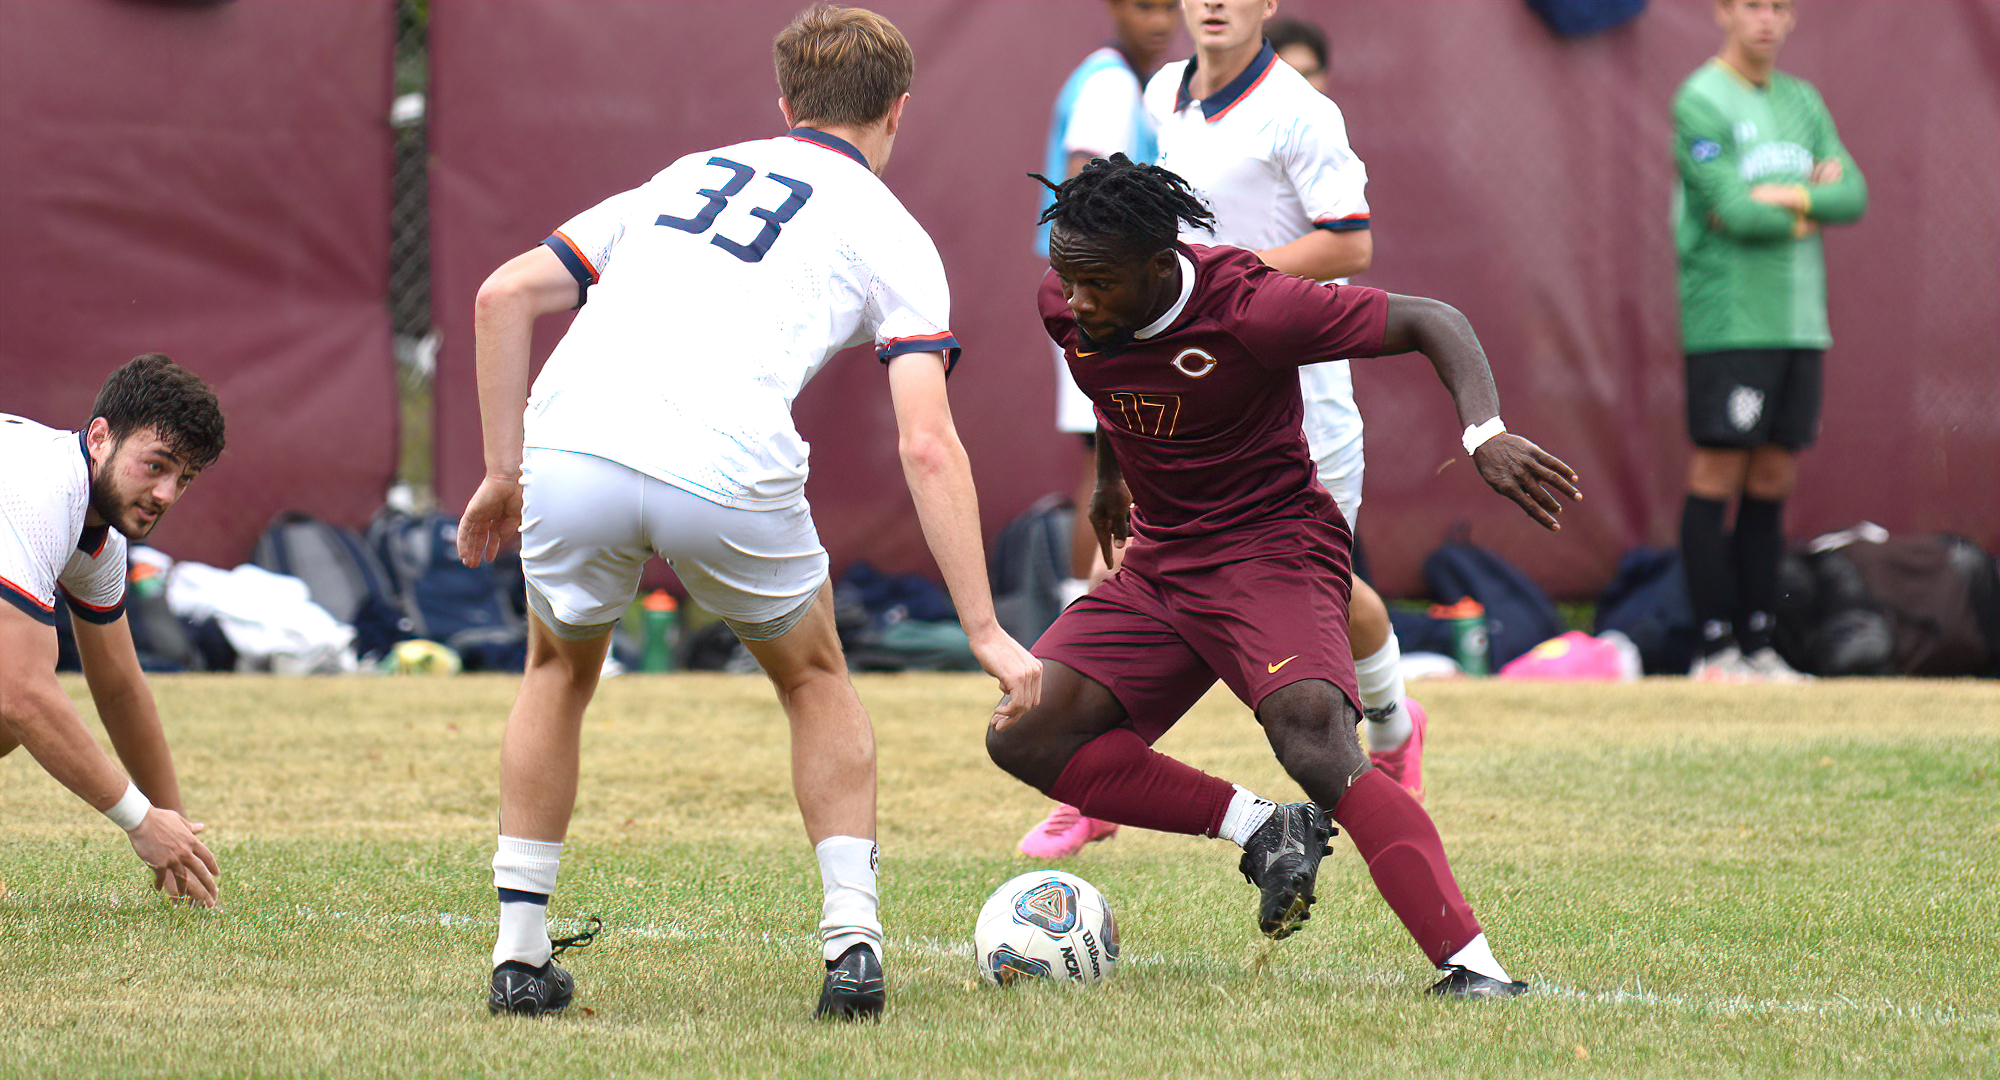 Junior Leo Dunor scored his team-leading sixth goal of the season in the Cobbers' game at Bethel.